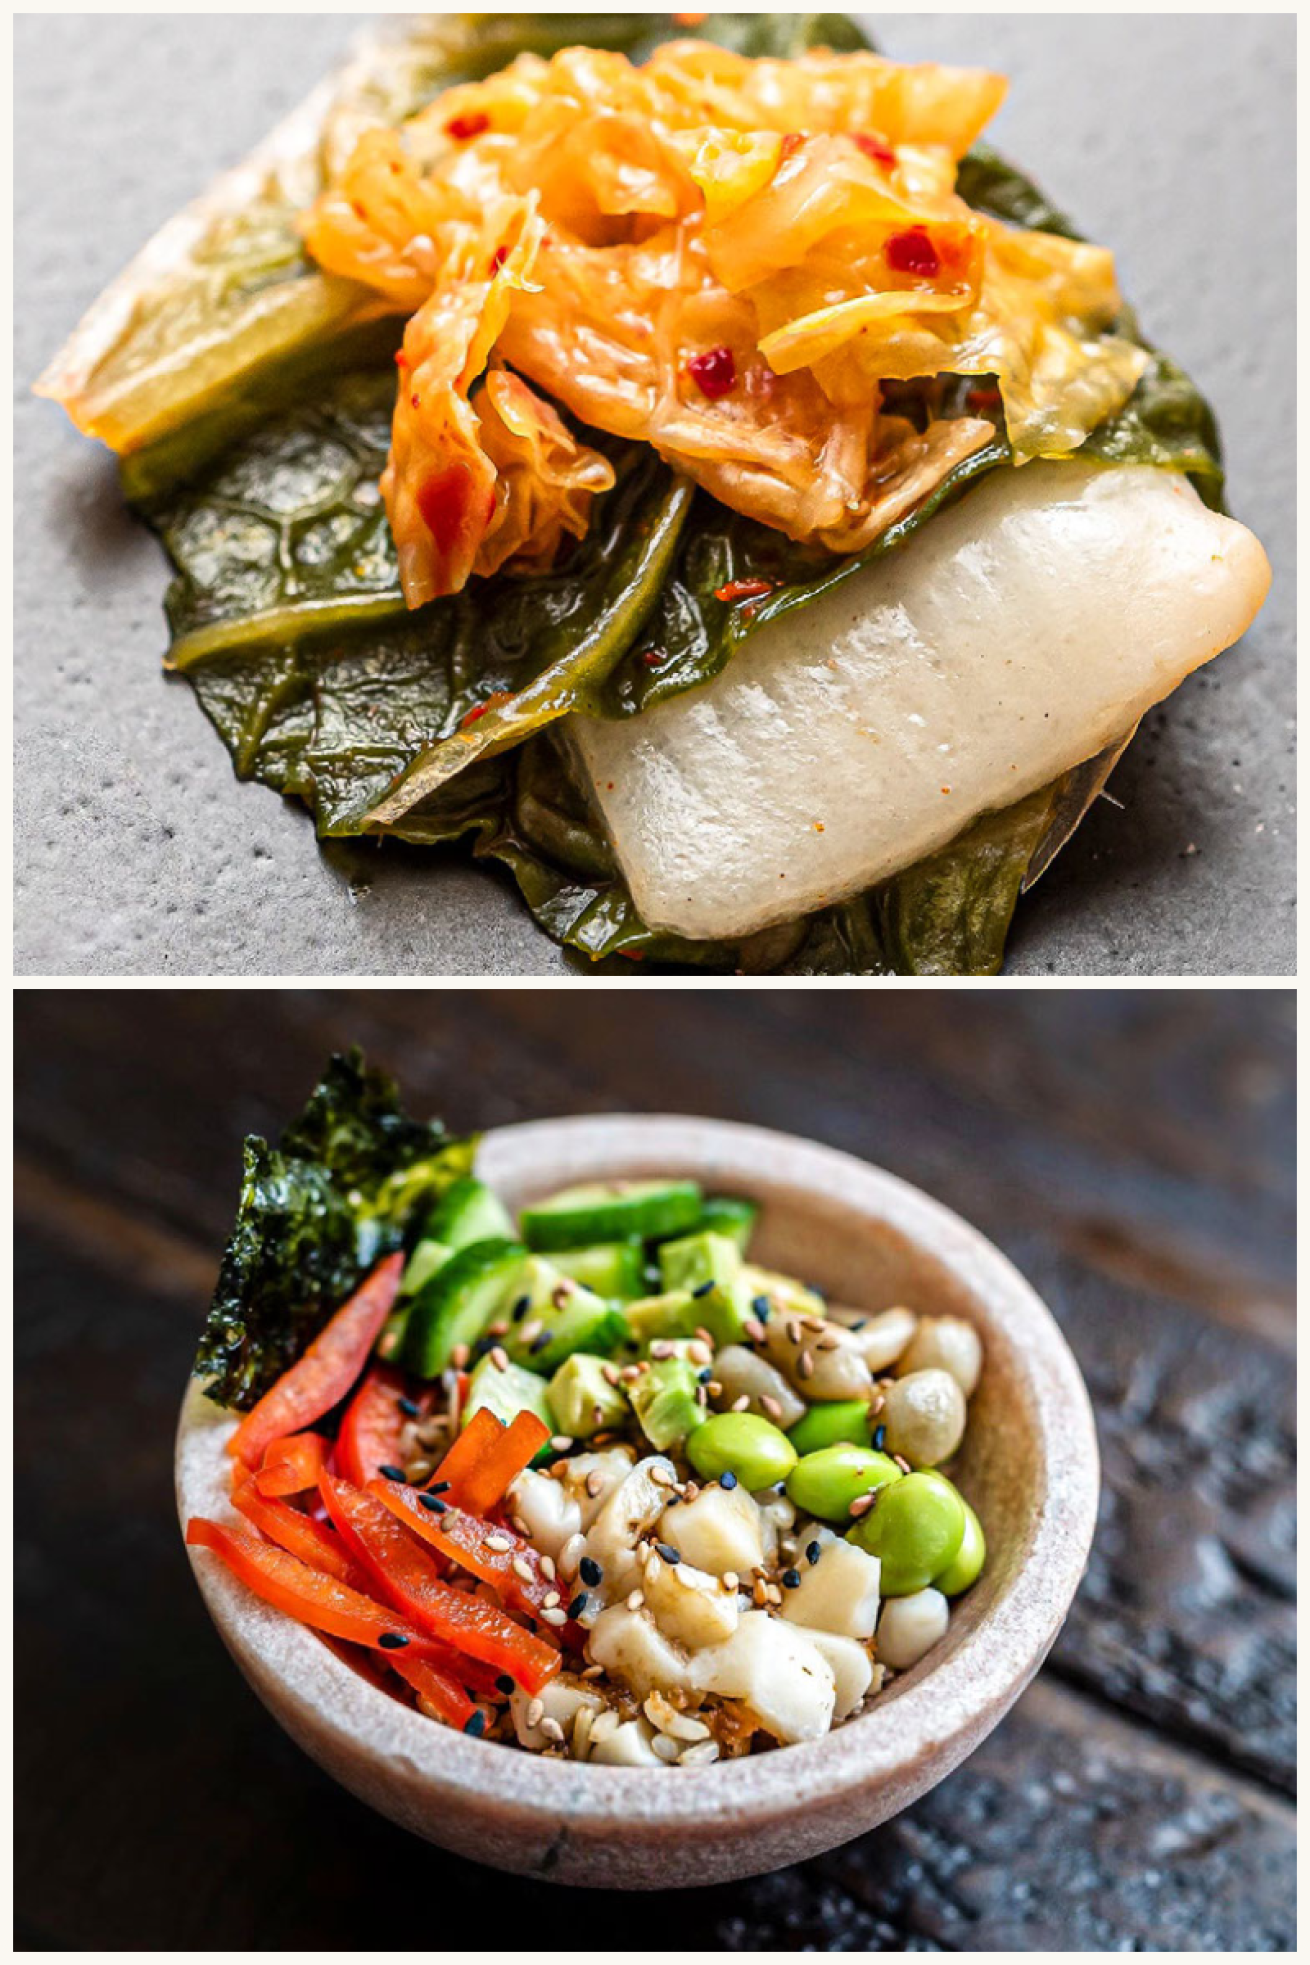 Two pictures of cultured yellowtail dishes